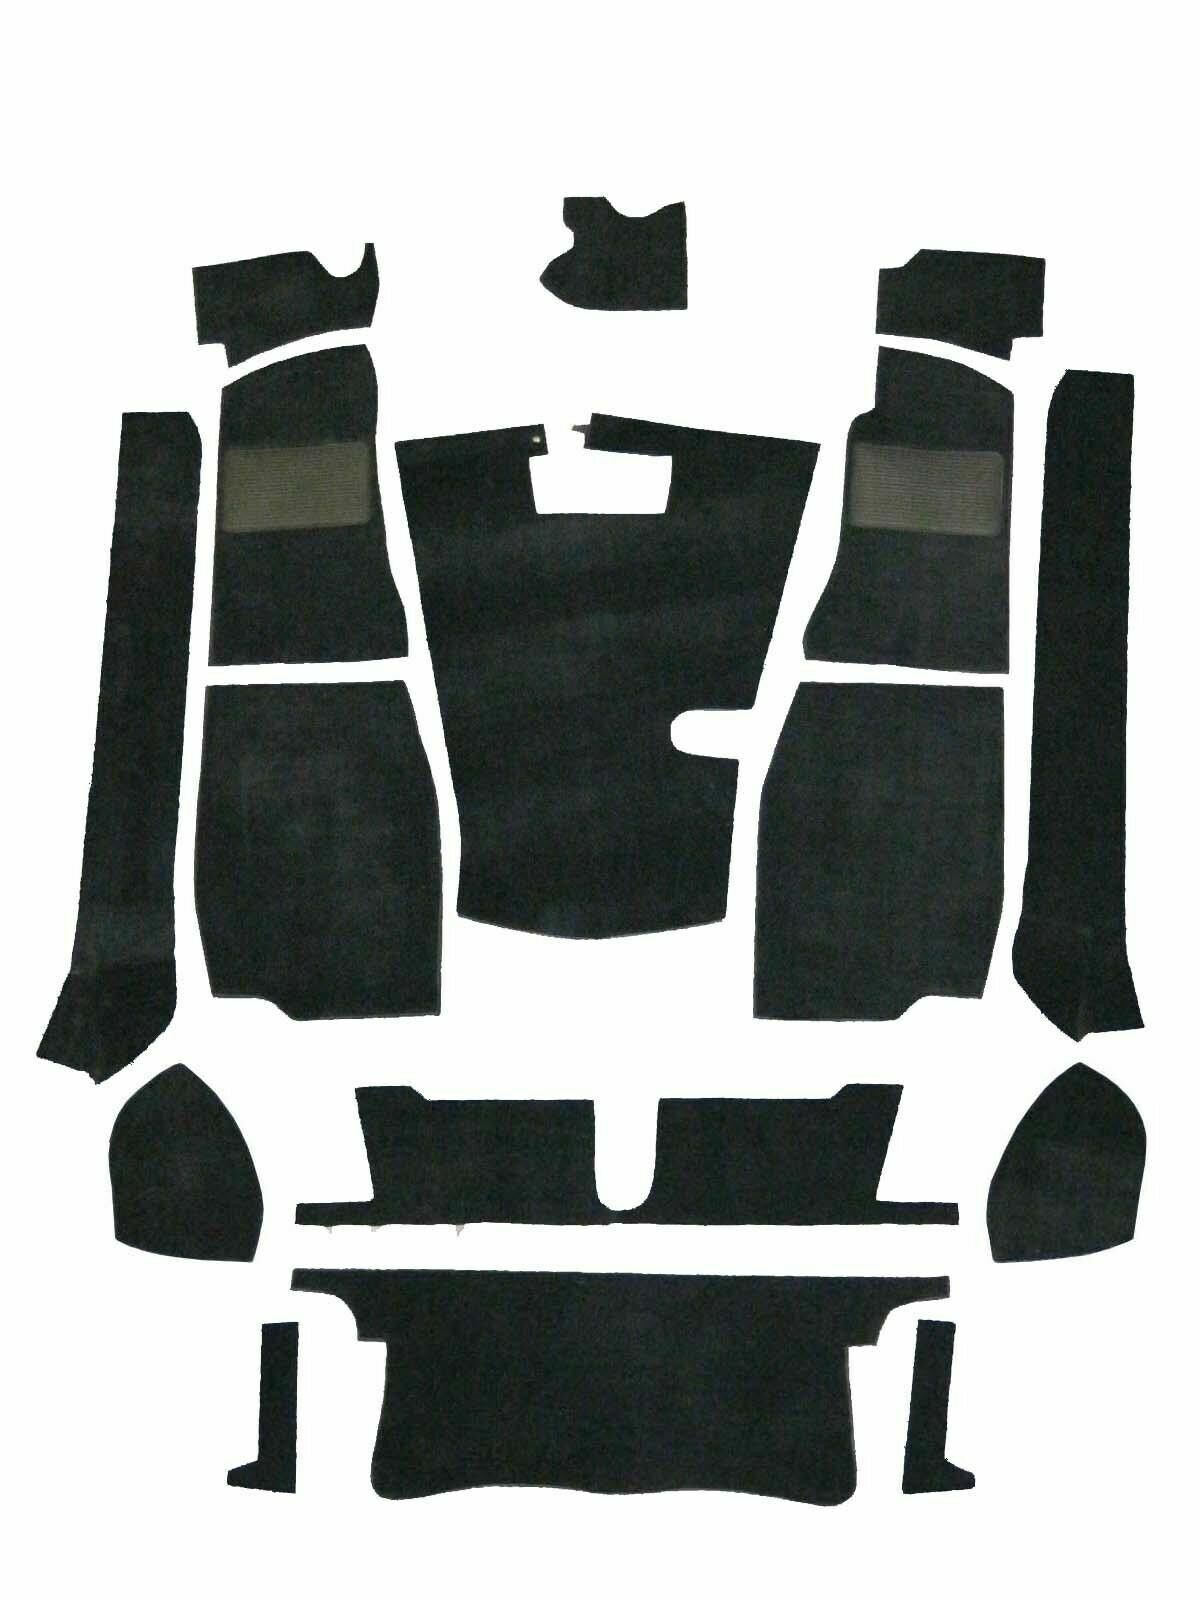 MG MGB GT Coupe 1968-1980 Complete Replacement Black Carpet Set